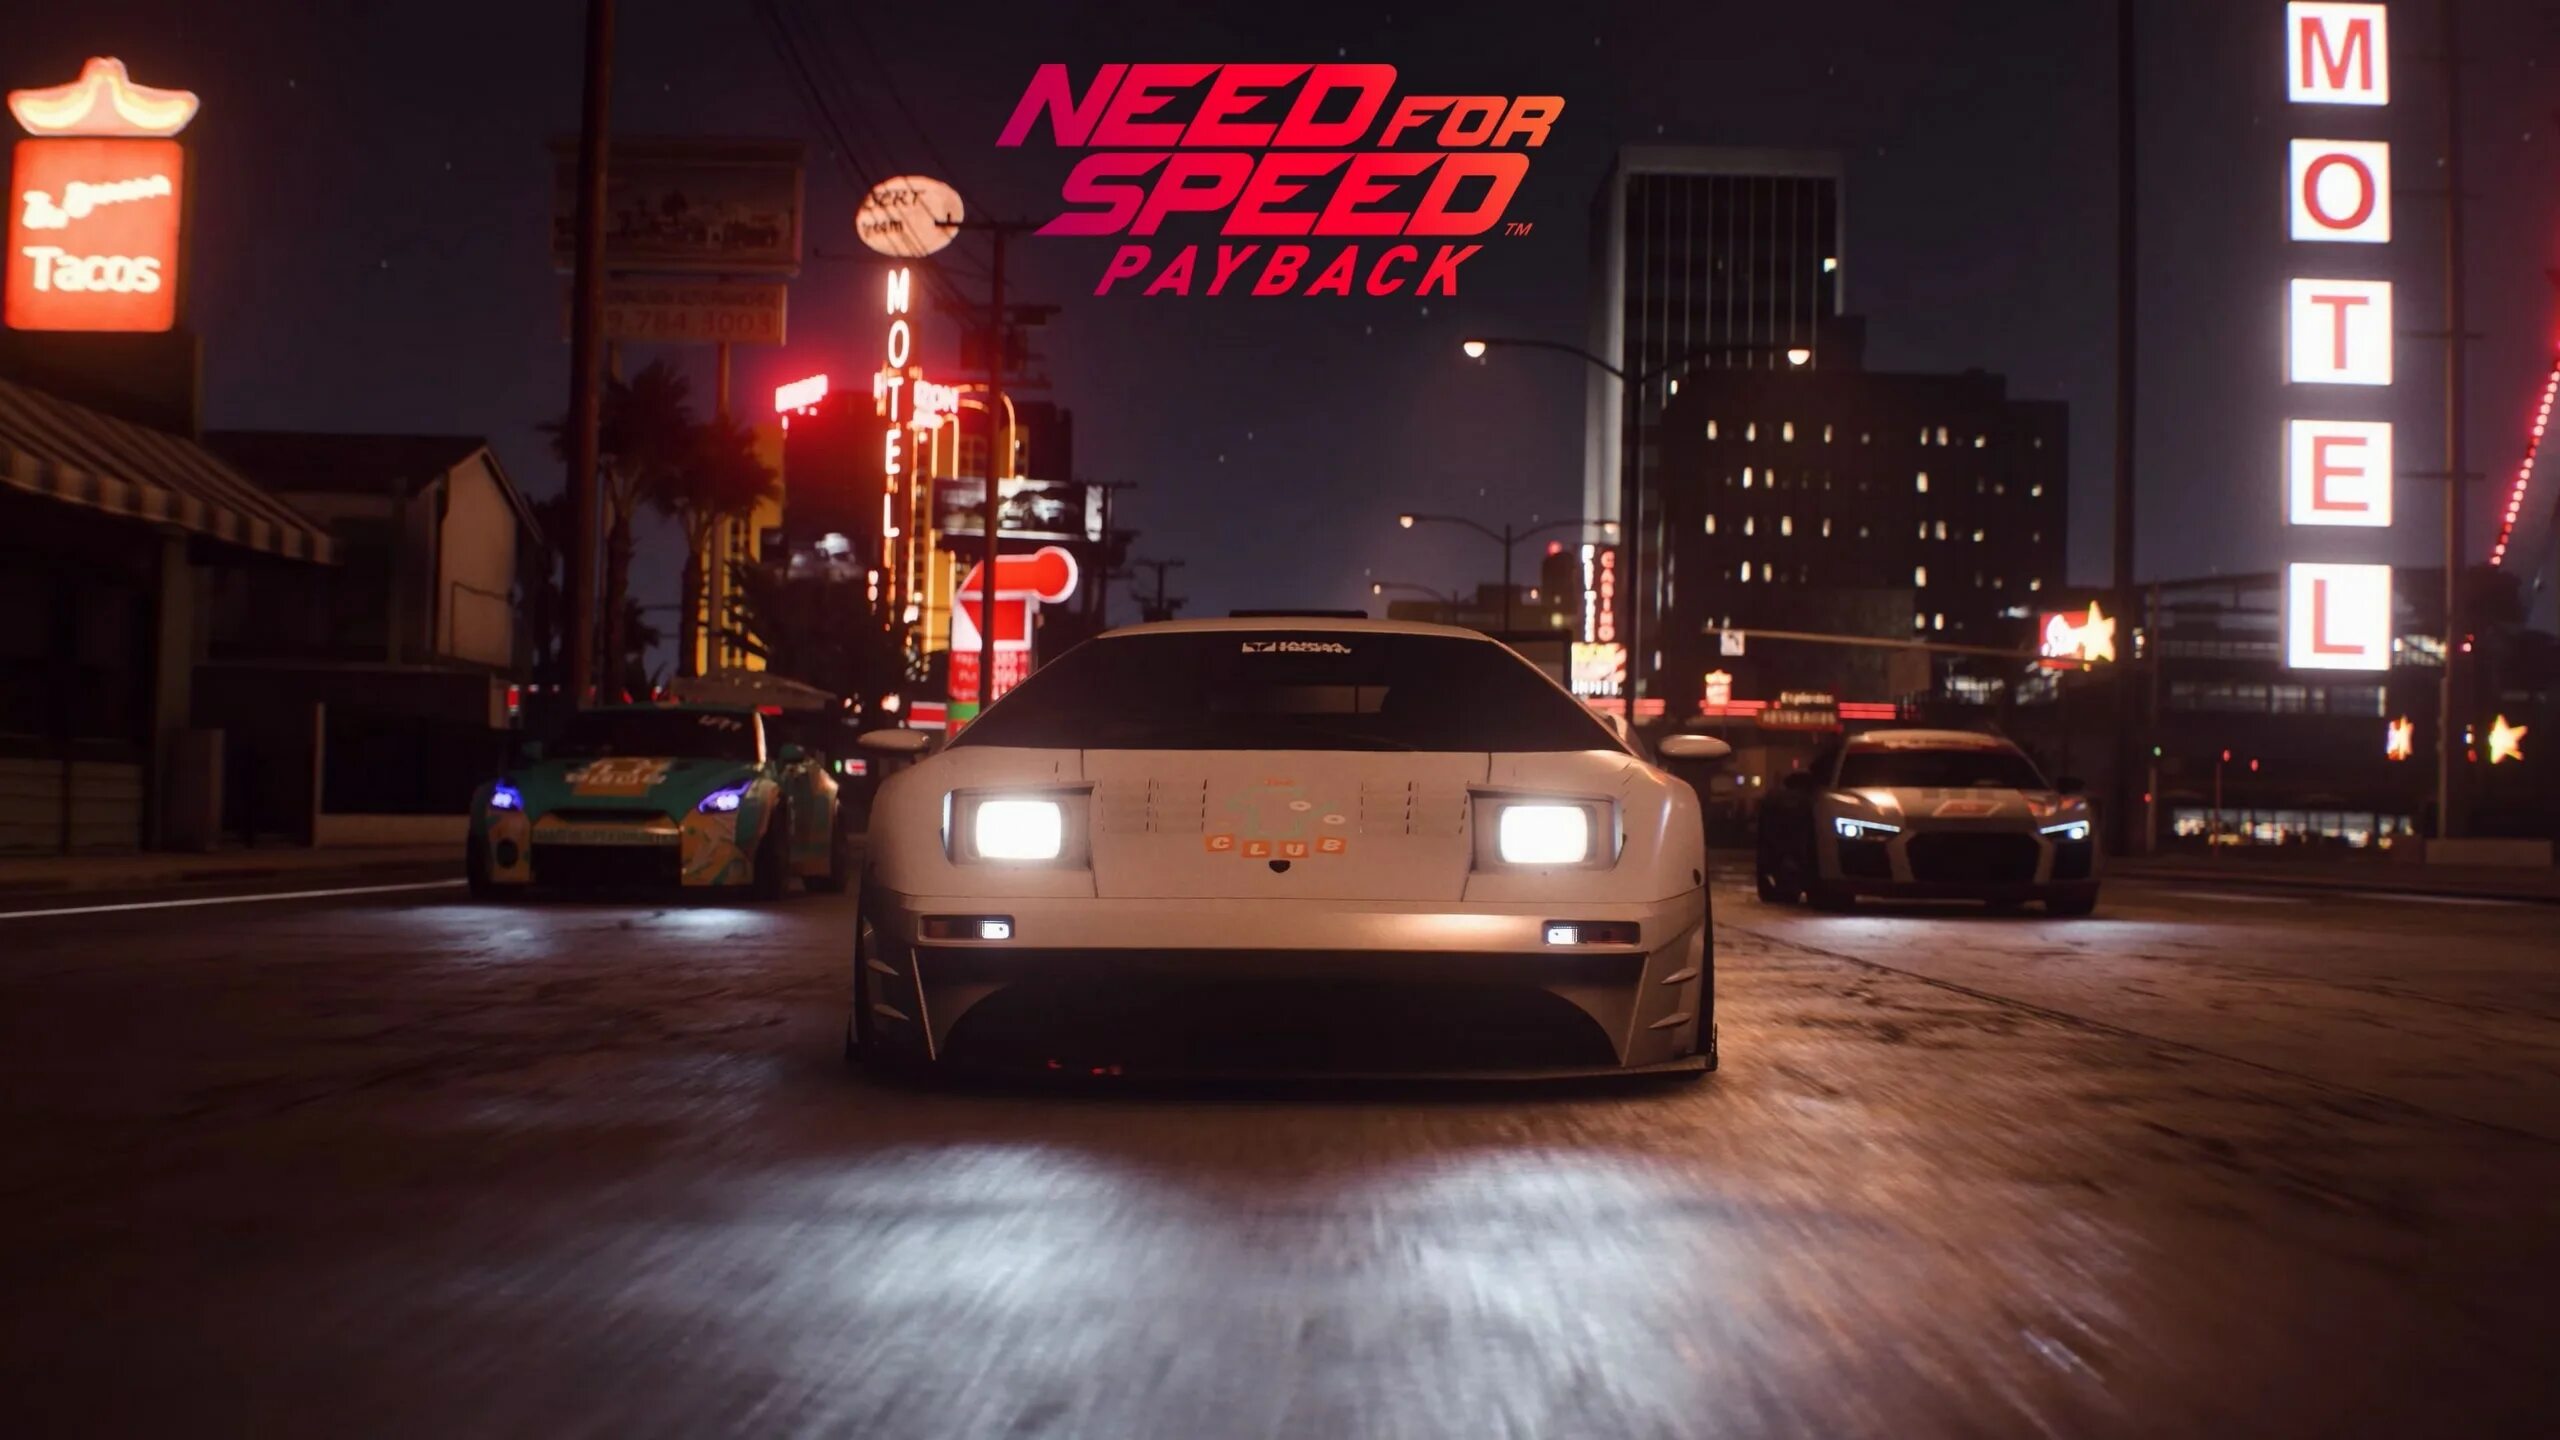 Need for speed 2017. NFS Payback. Игра need for Speed Payback. Need for Speed пайбэк.